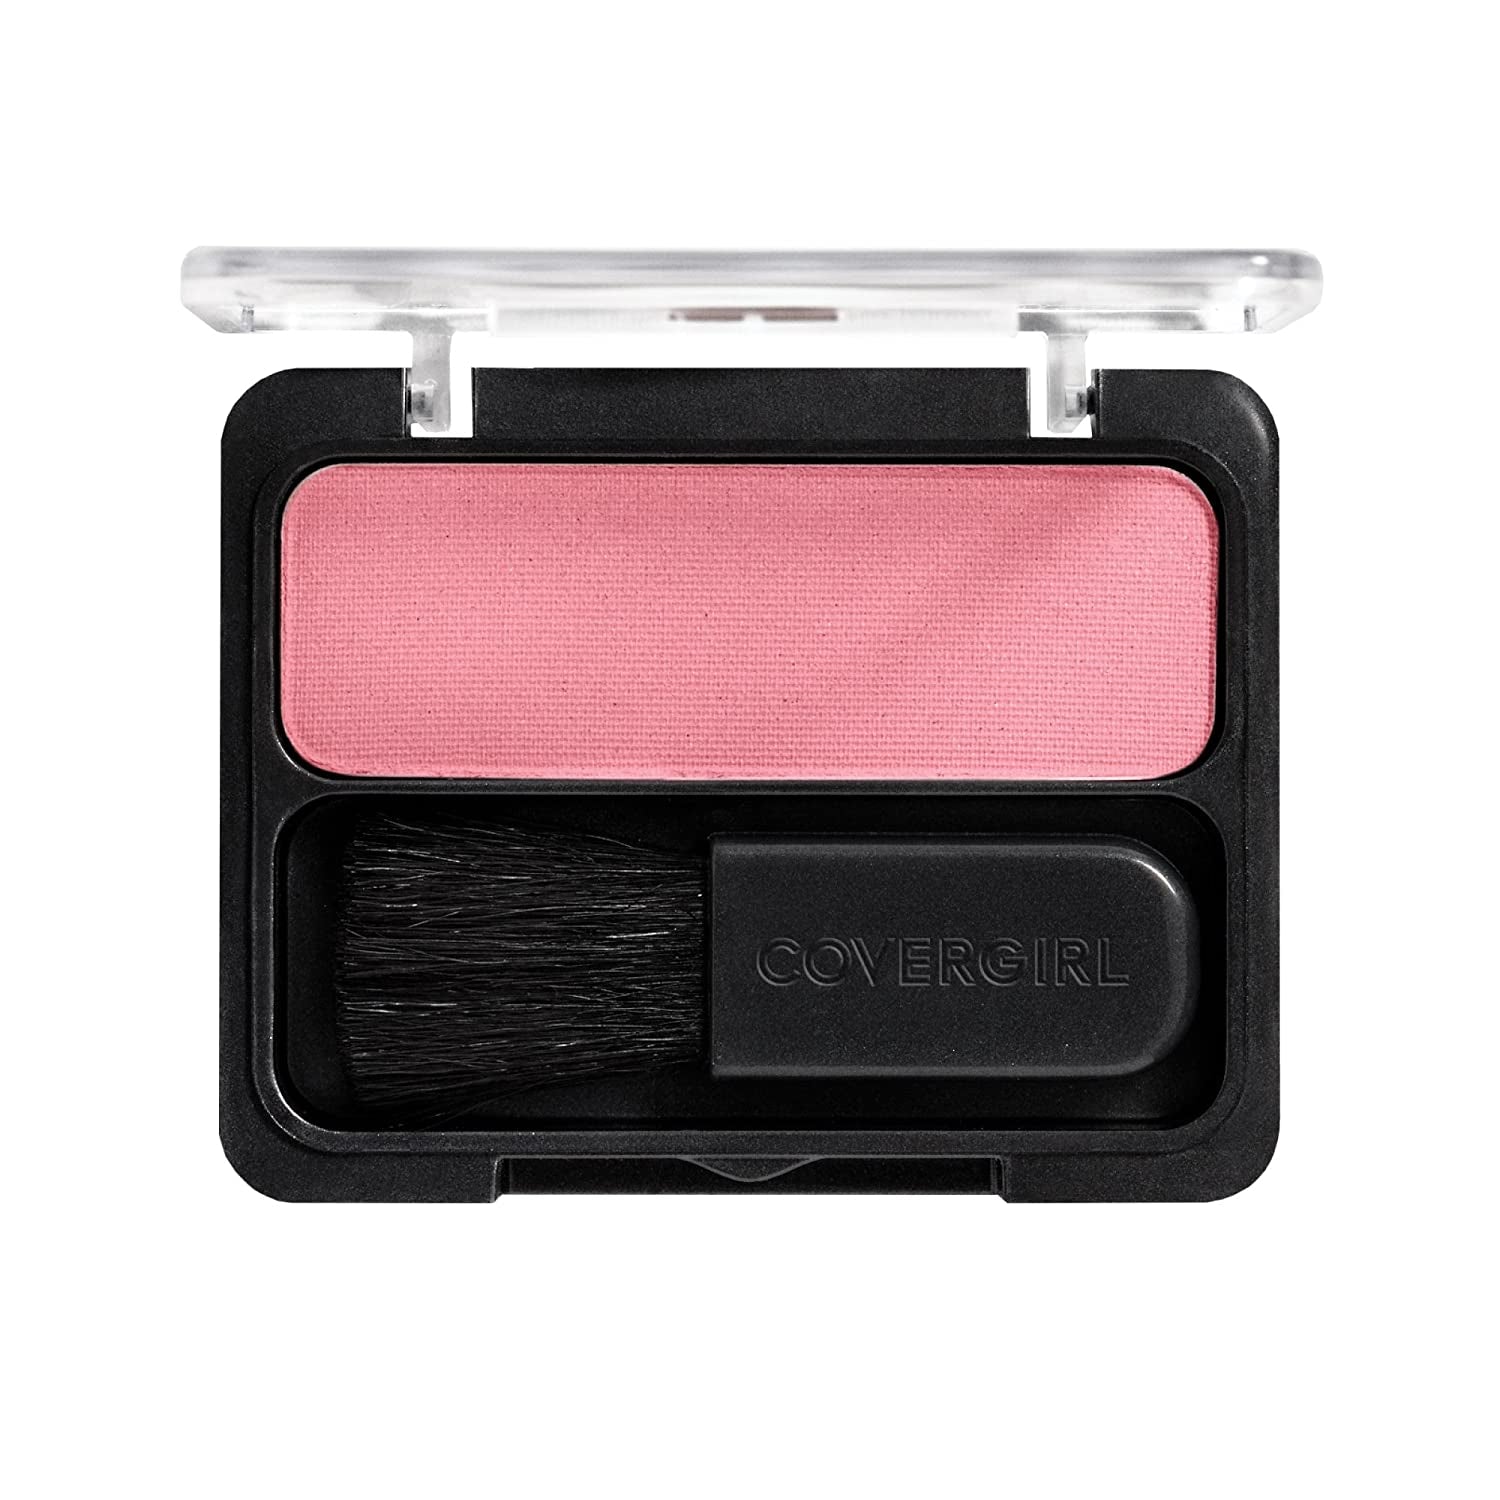 COVERGIRL Cheekers Blendable Powder Blush, Classic Pink, 1 Count (Packaging May Vary)